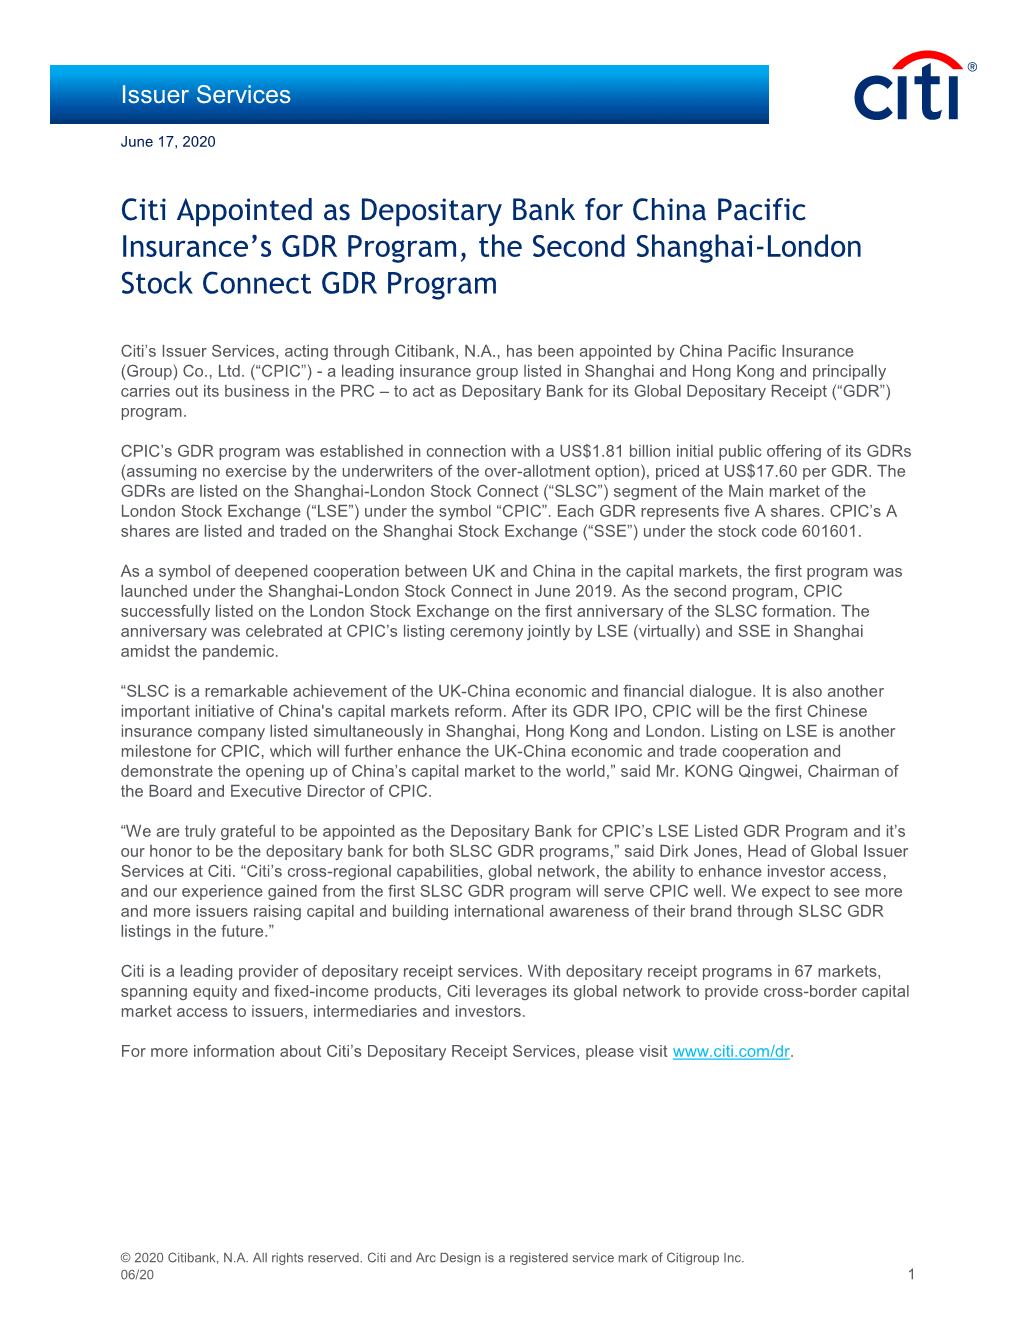 Citi Appointed As Depositary Bank for China Pacific Insurance's GDR